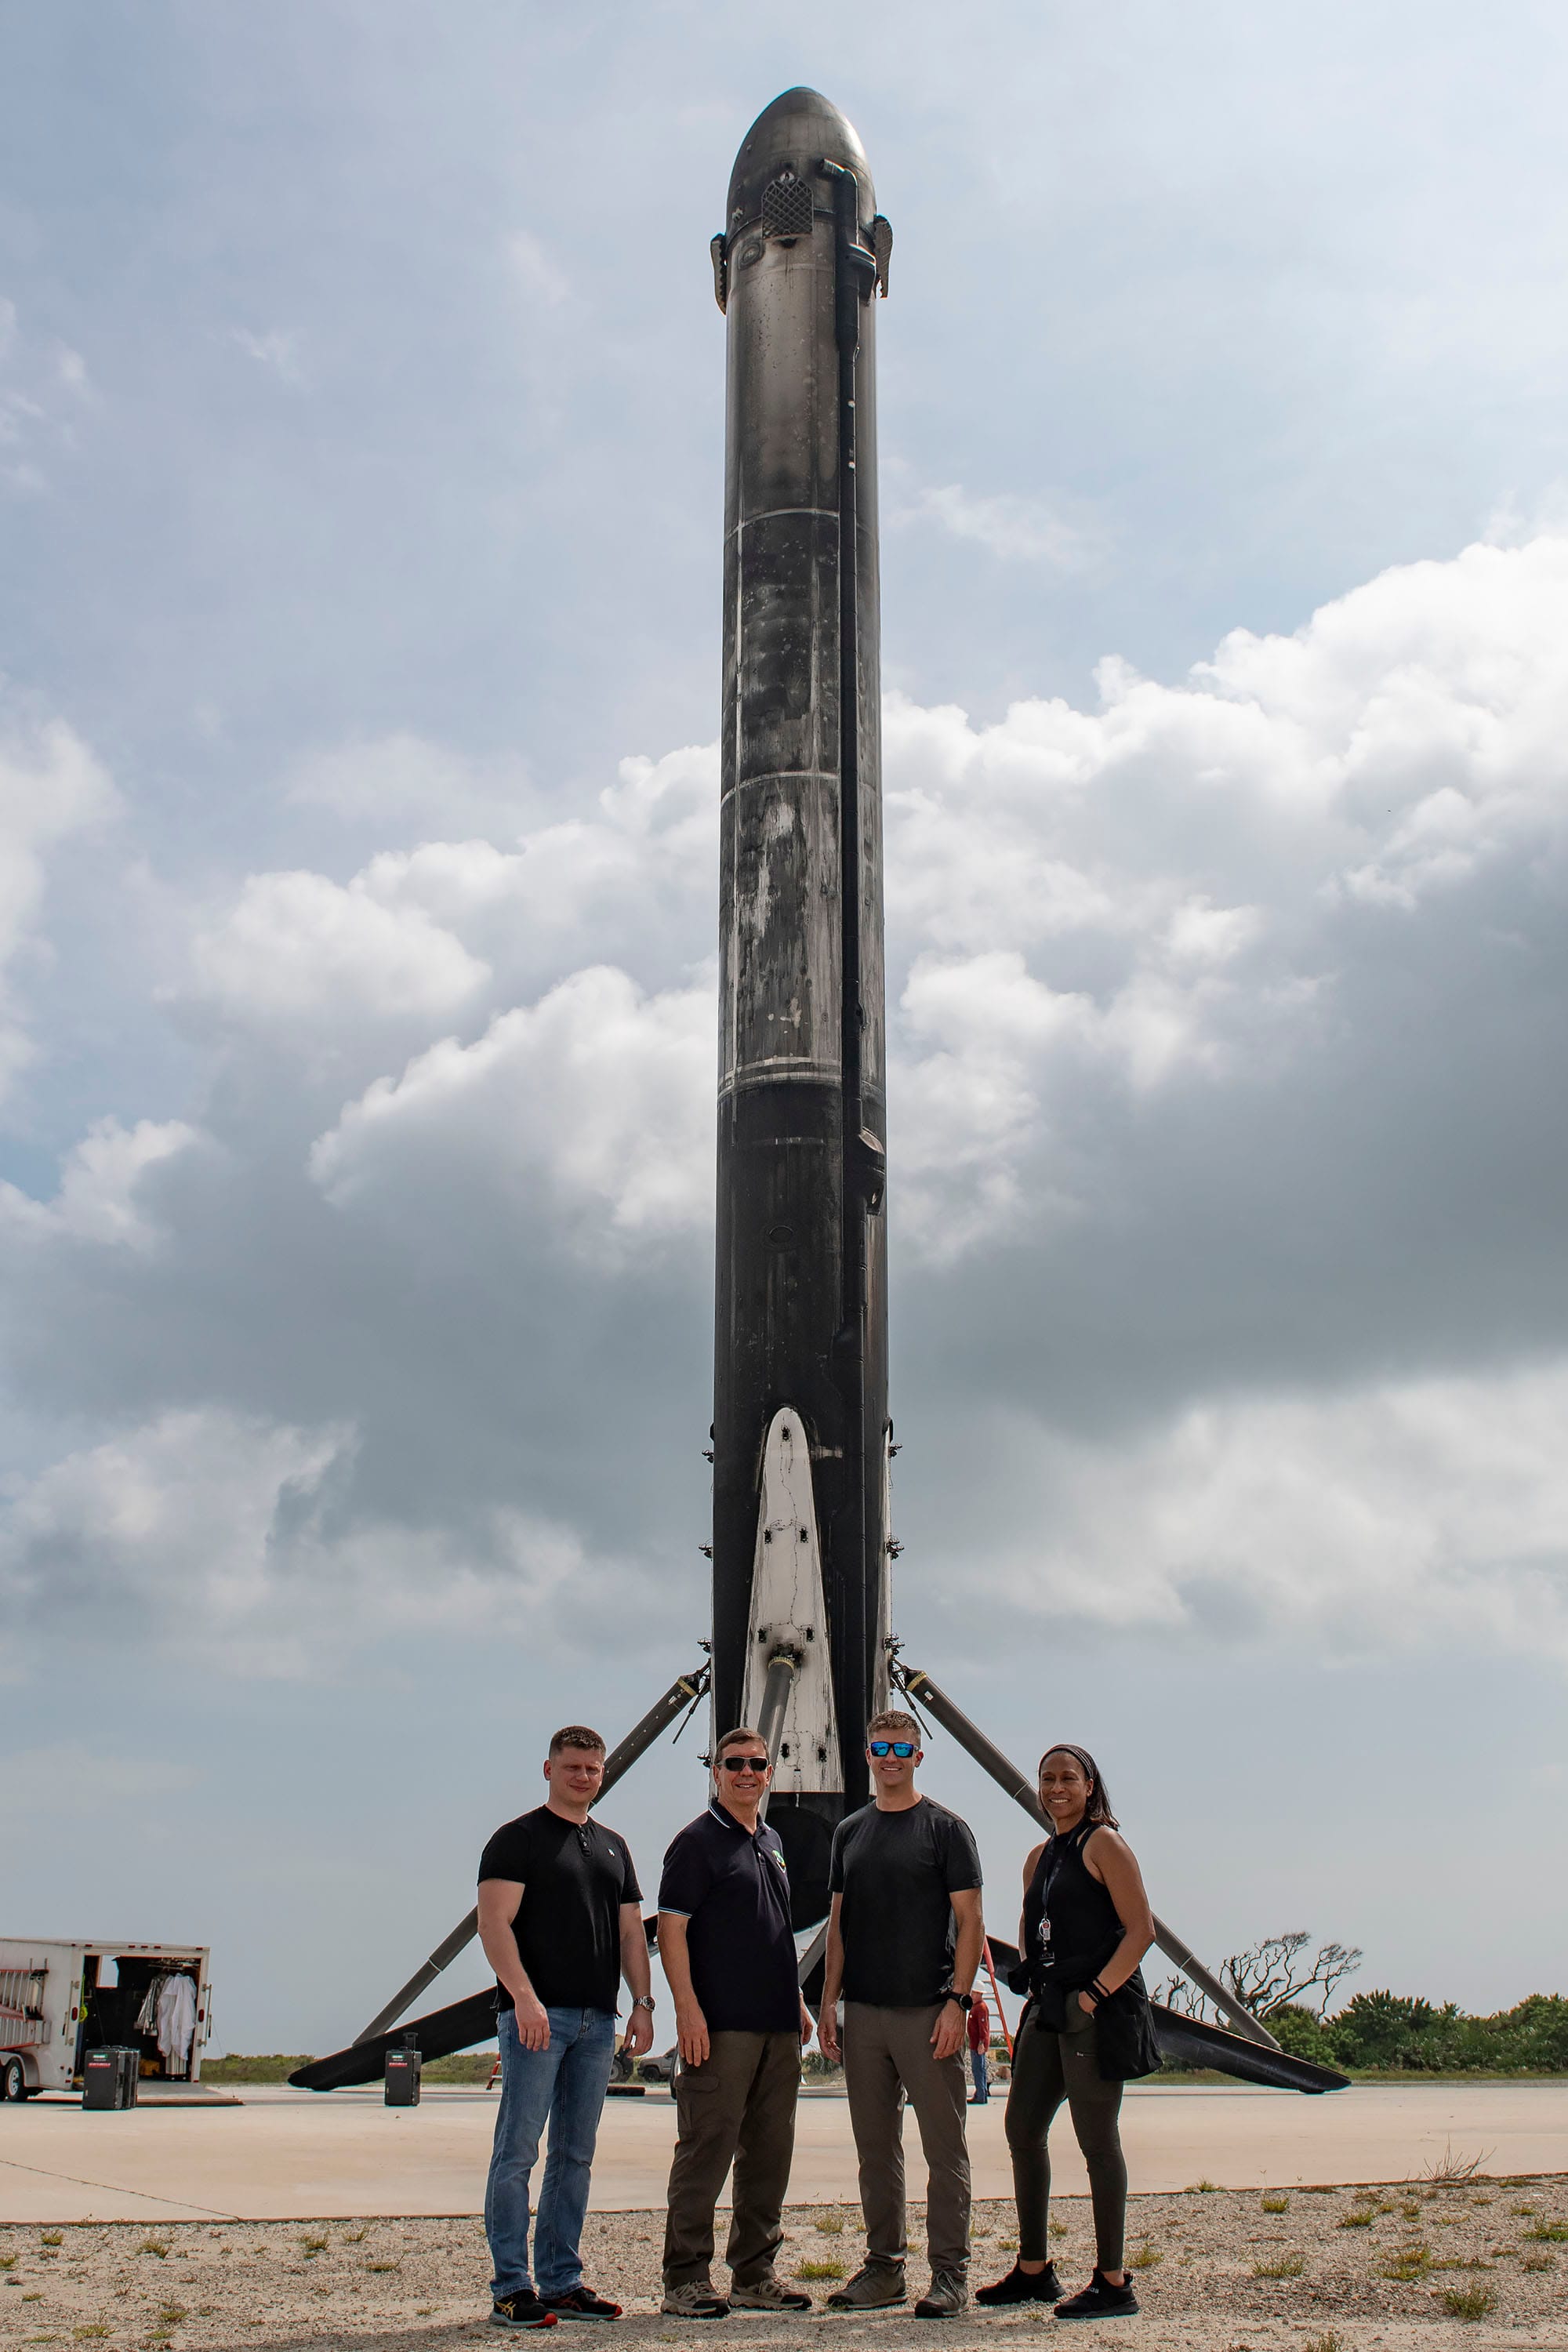 The Crew-8 astronauts in front of one of Falcon Heavy's boosters used for the Psyche mission, from left to right: Alexander Grebenkin, Michael Barratt, Matthew Dominick, and Jeanette Epps. ©SpaceX/NASA